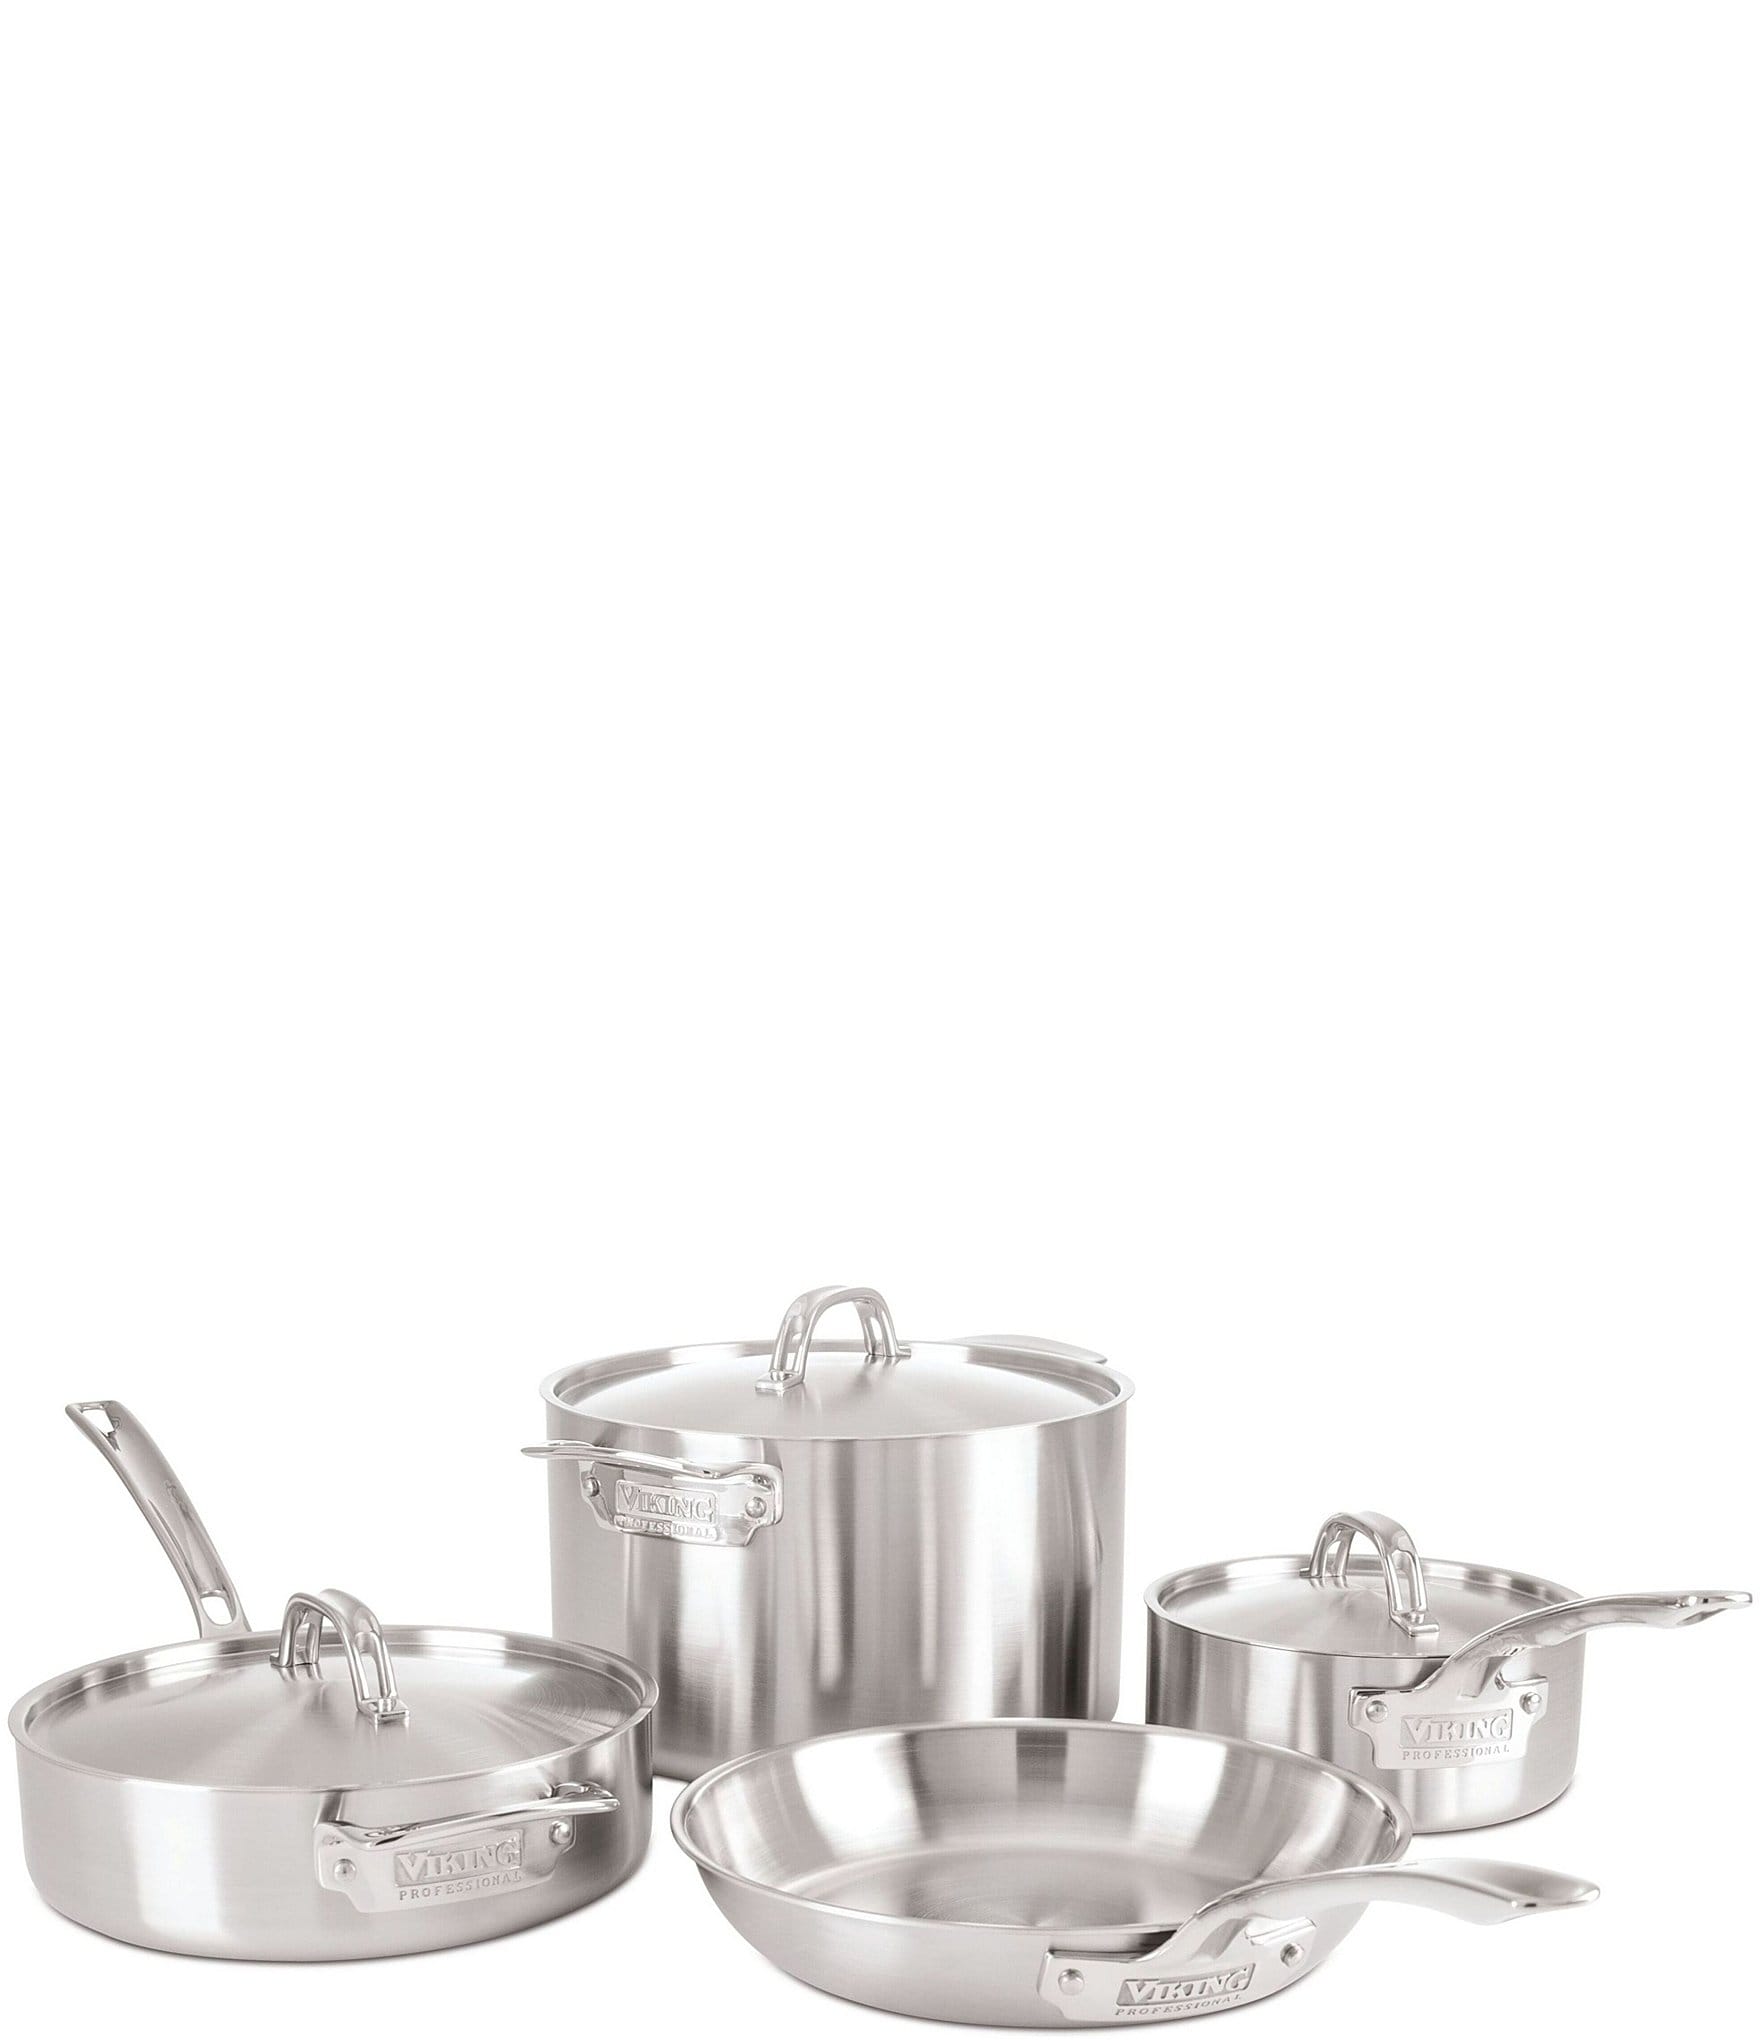 Viking Professional 5 Ply Stainless Steel Cookware - 7 Piece Set